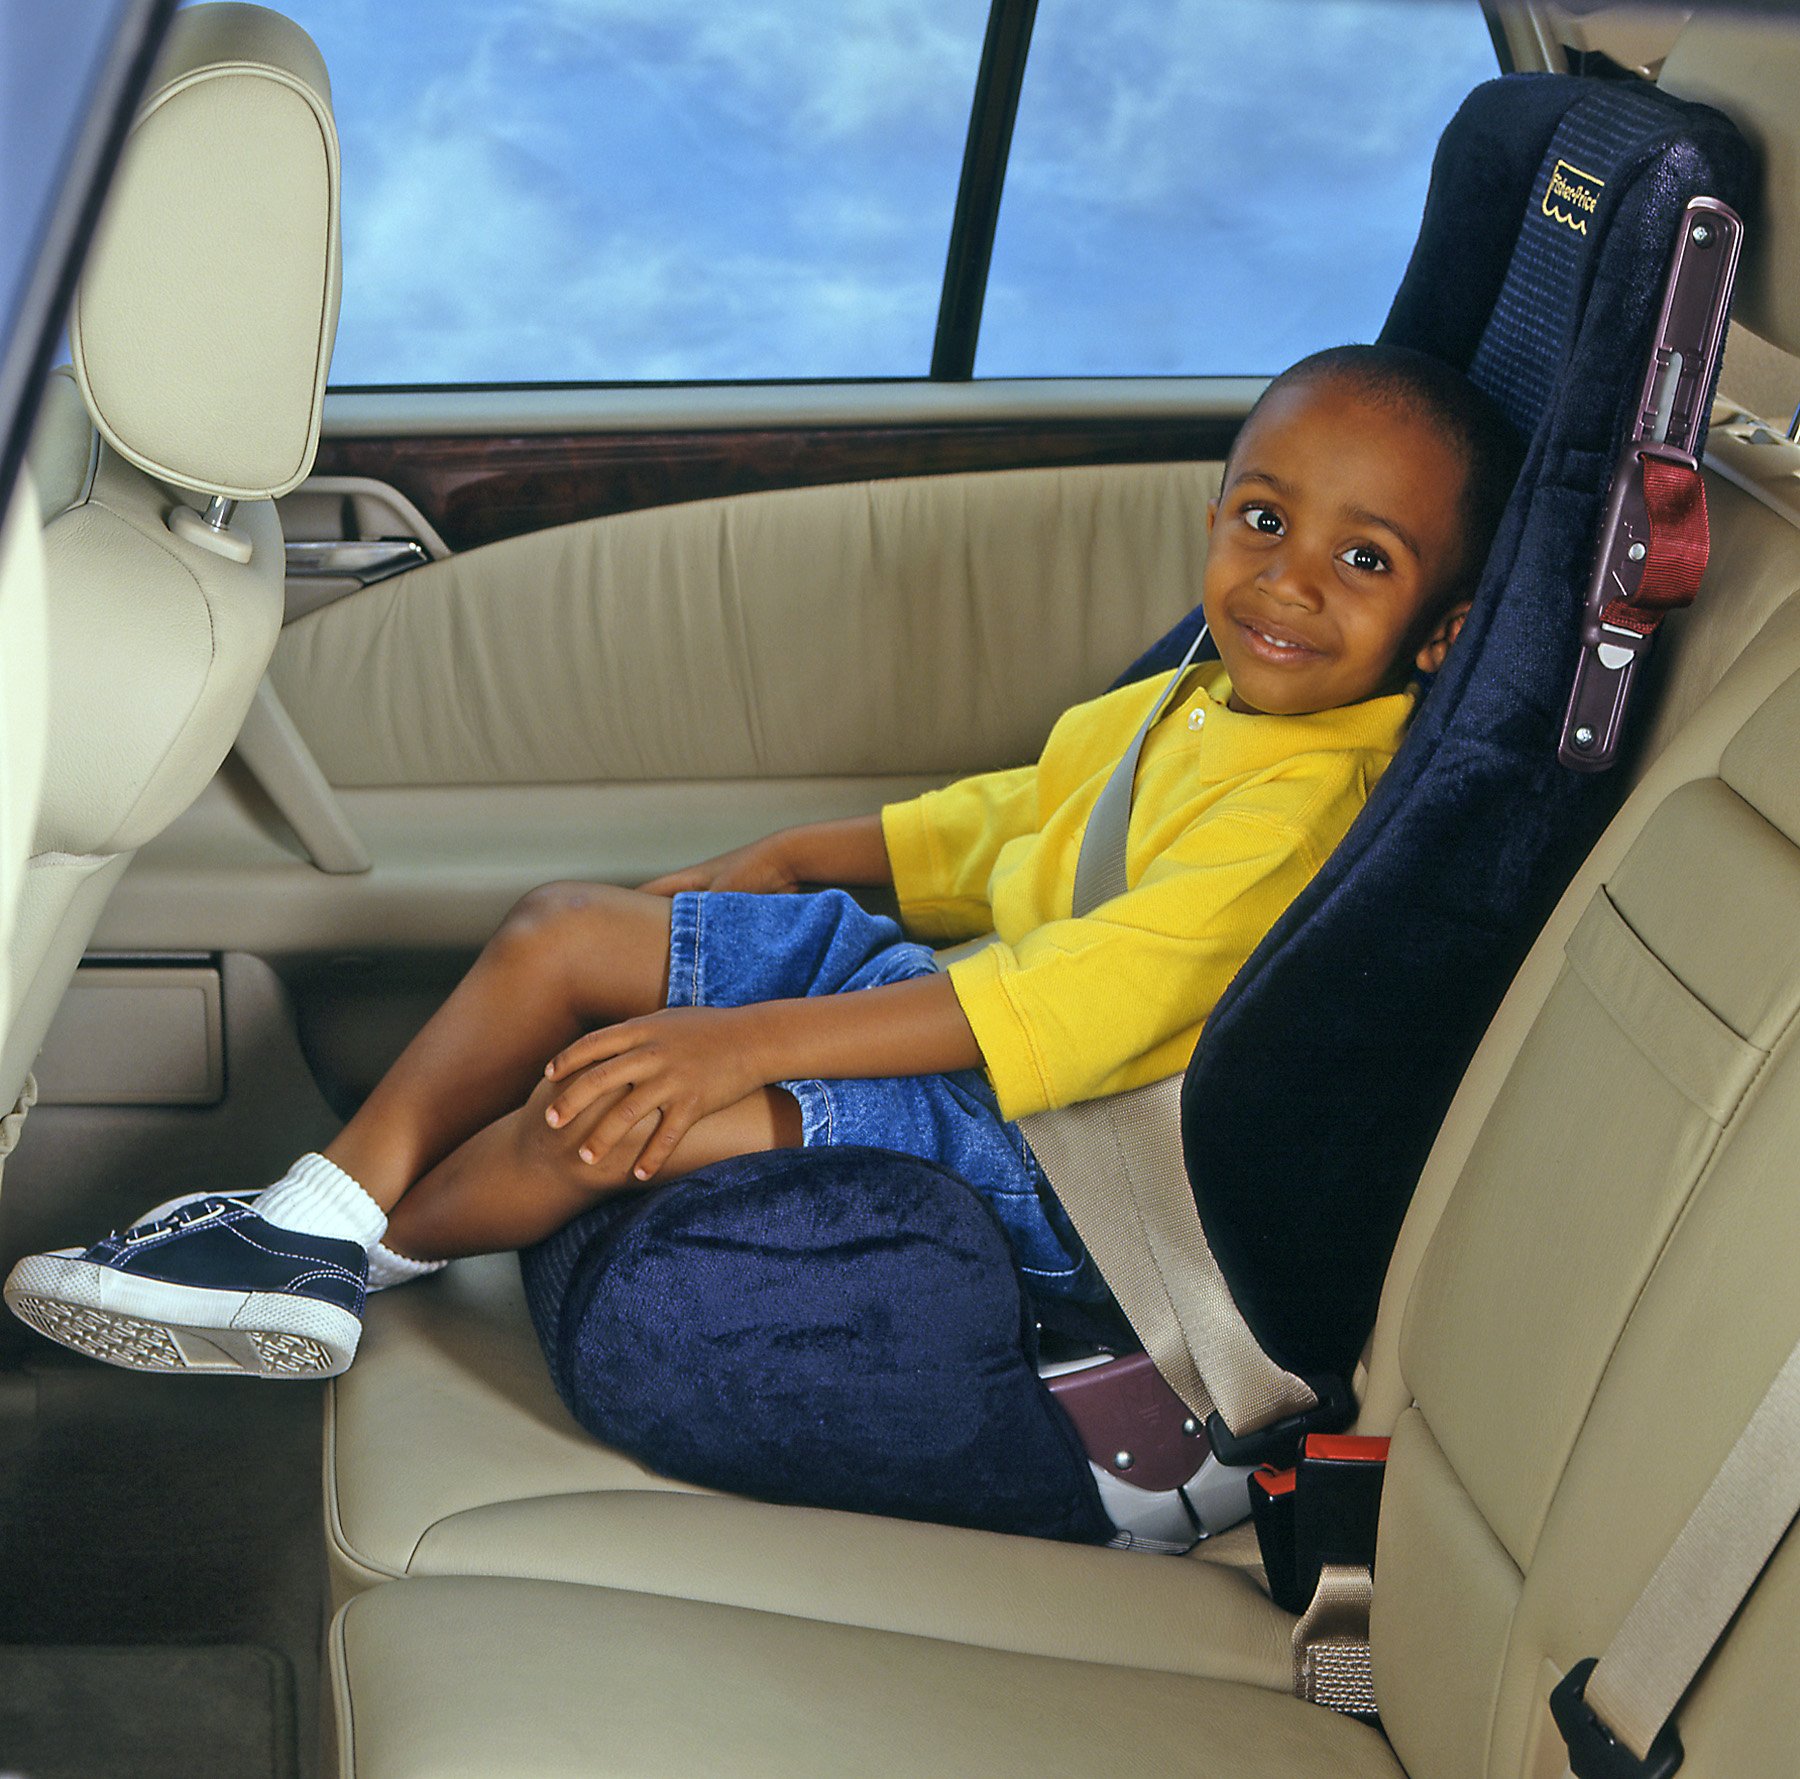 Child in Seatbelt for GGMB Safety Campaign